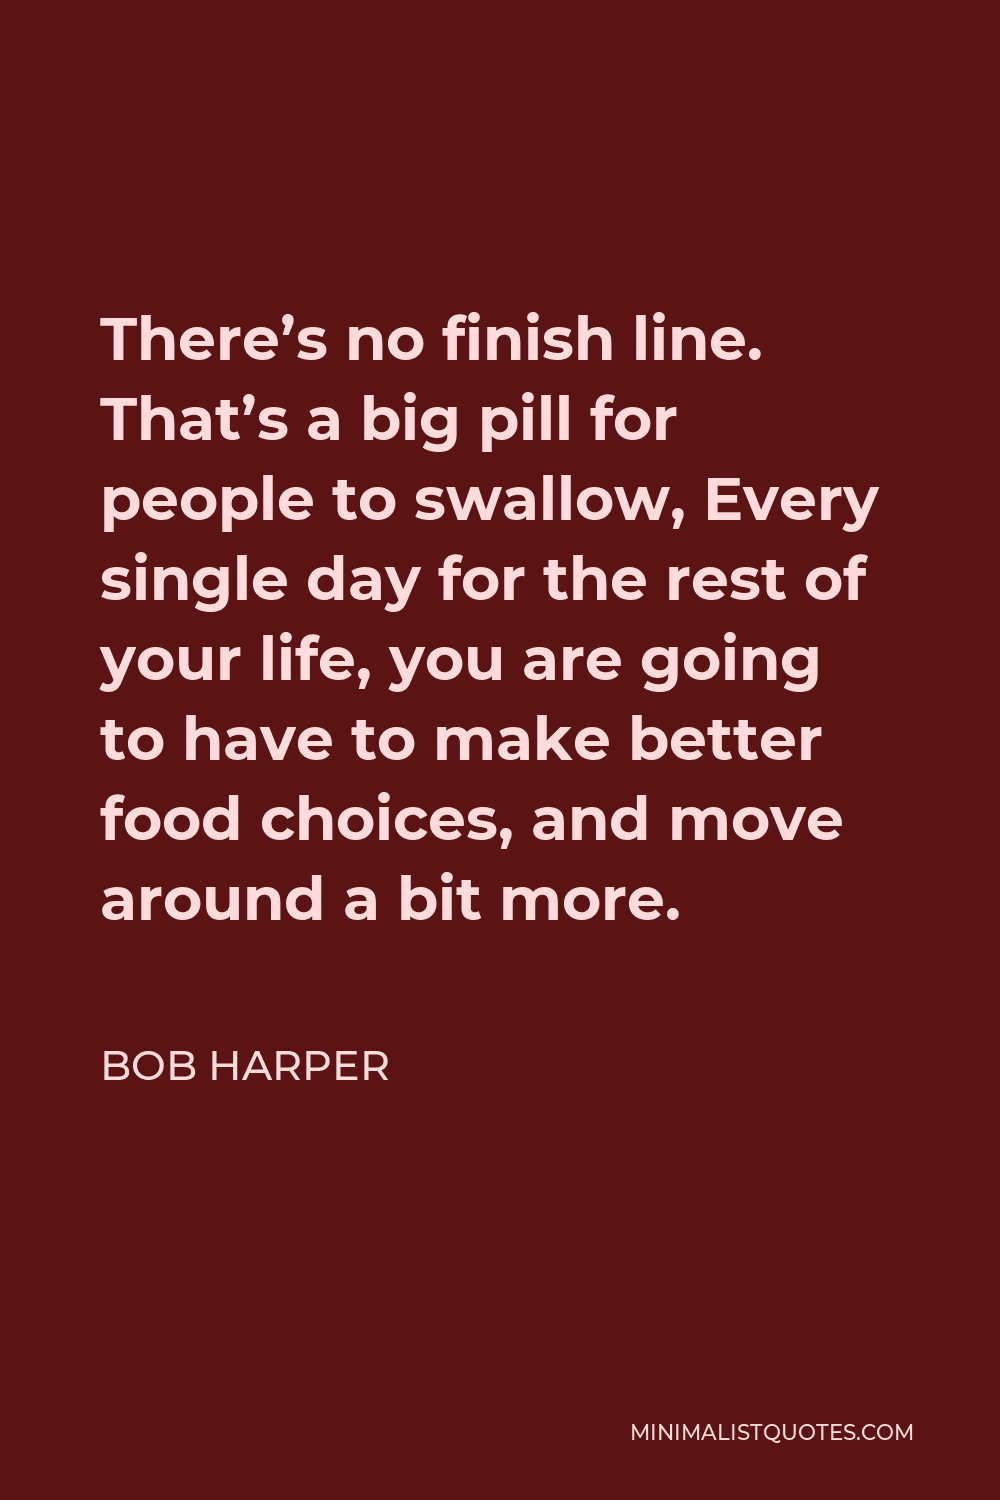 Bob Harper Quote - There’s no finish line. That’s a big pill for people to swallow, Every single day for the rest of your life, you are going to have to make better food choices, and move around a bit more.